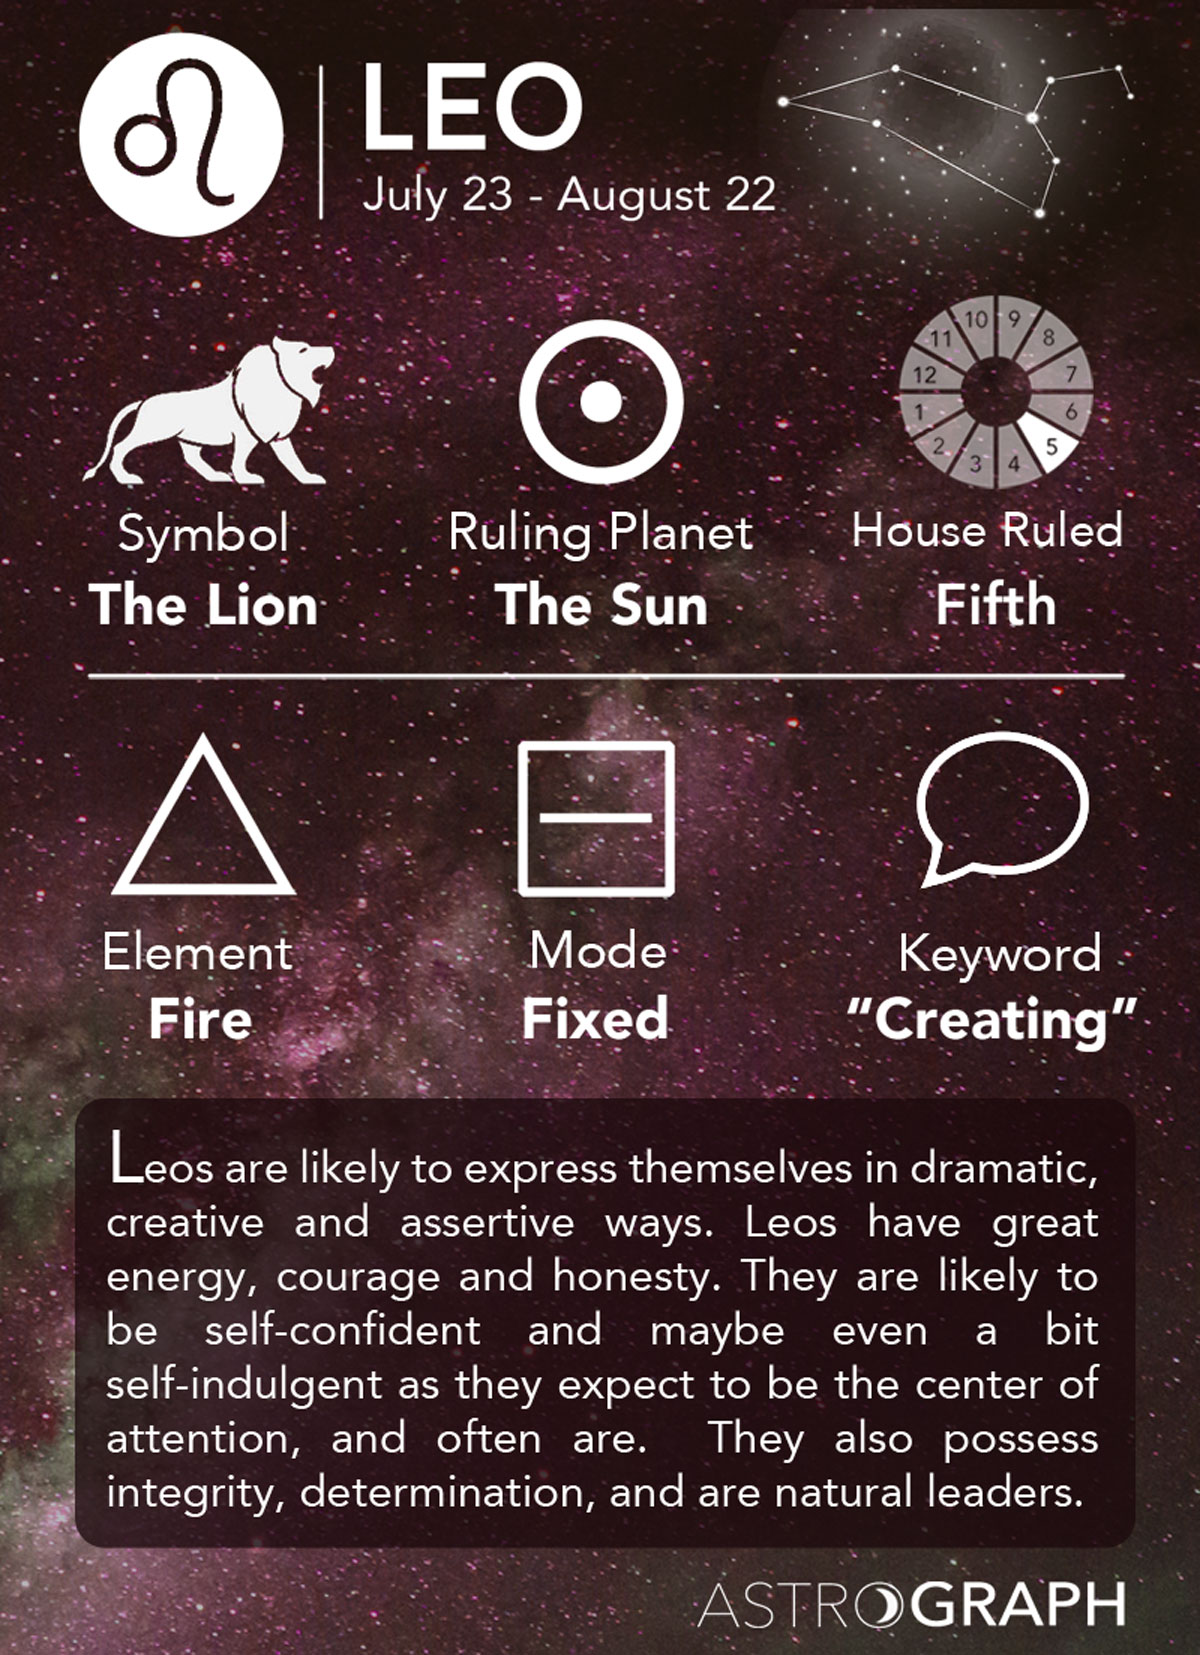 Leo: The Zodiac Sign After Cancer